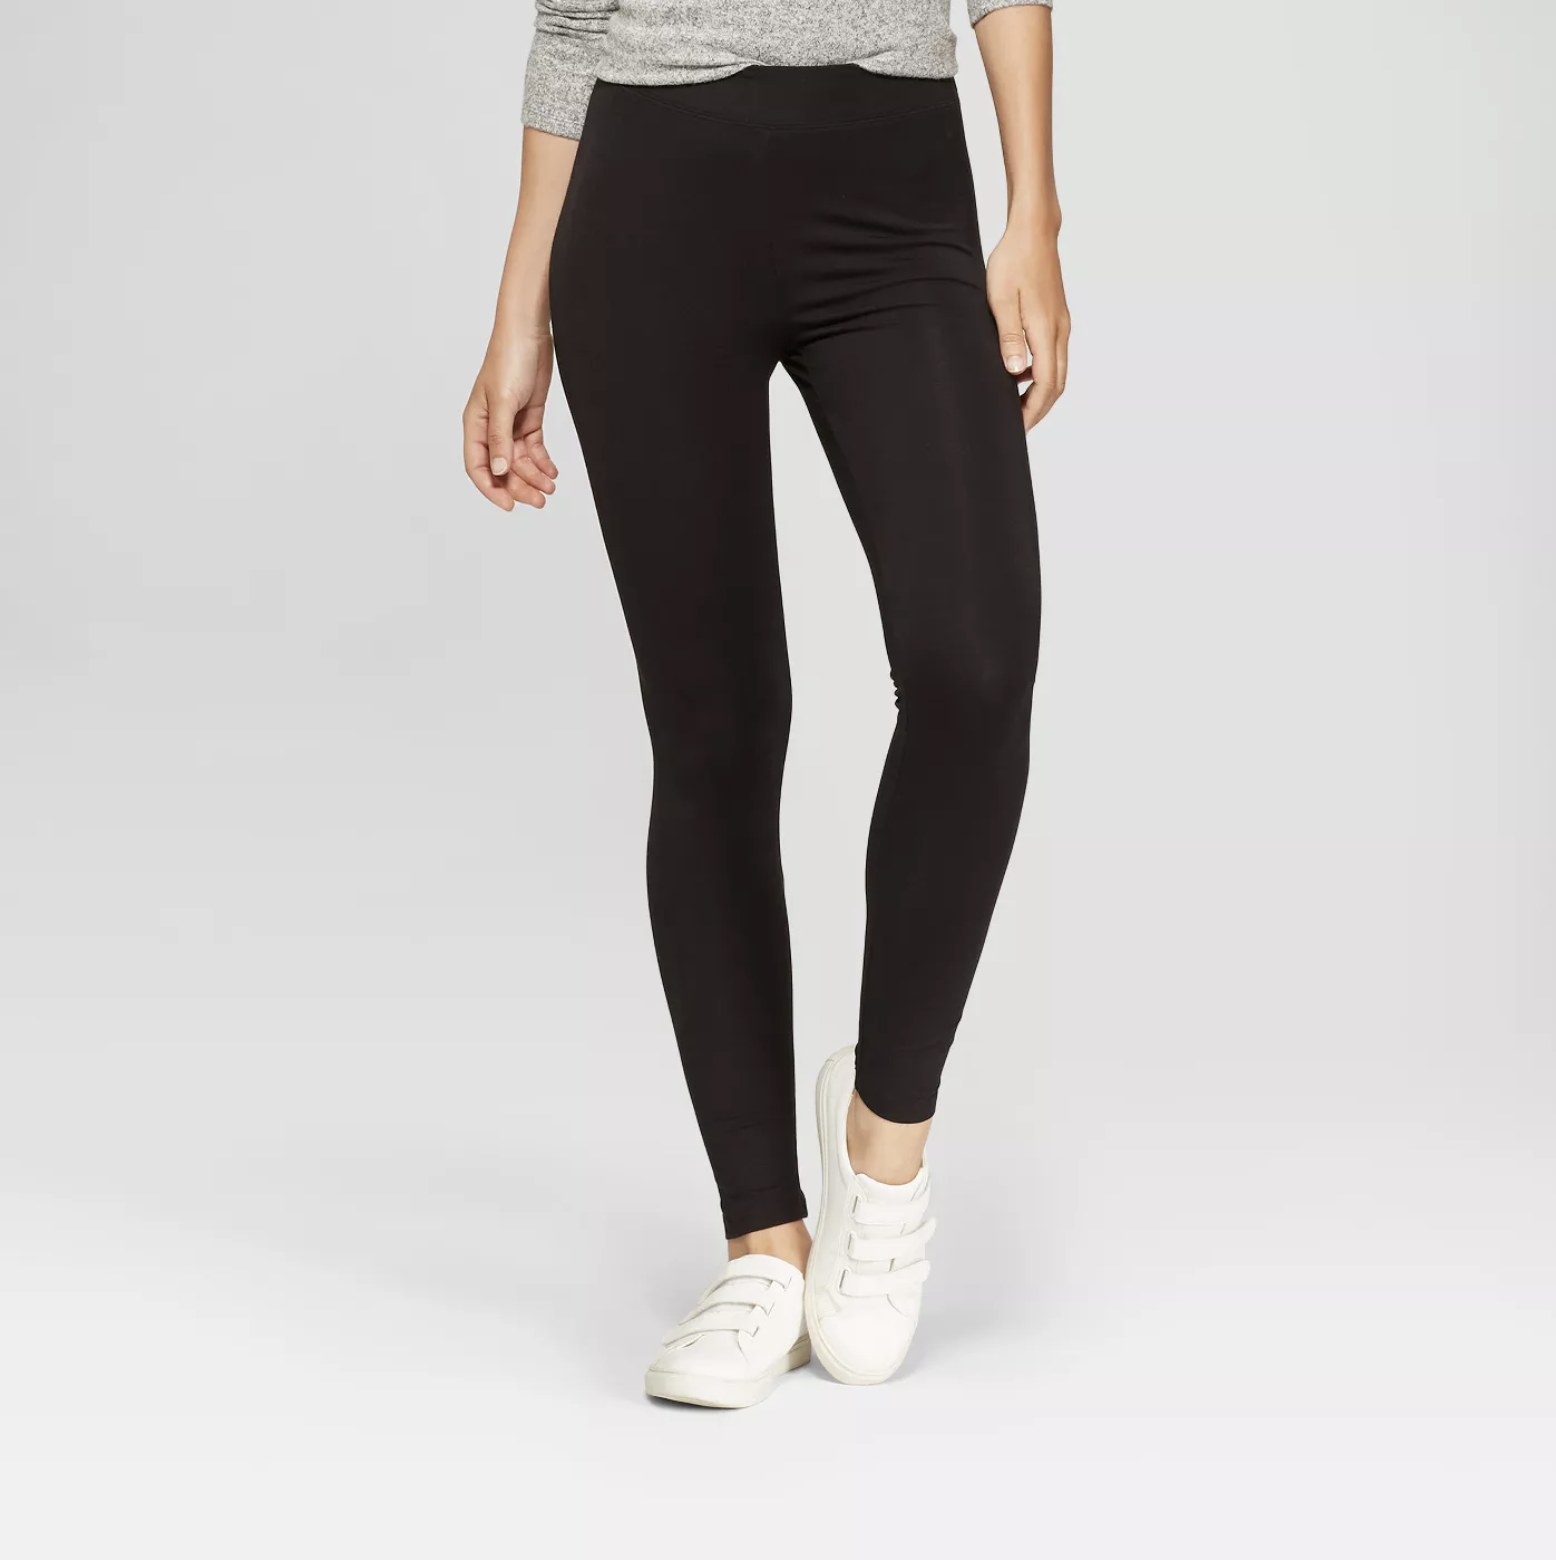 Model wears black high-rise leggings with a gray top and white sneakers